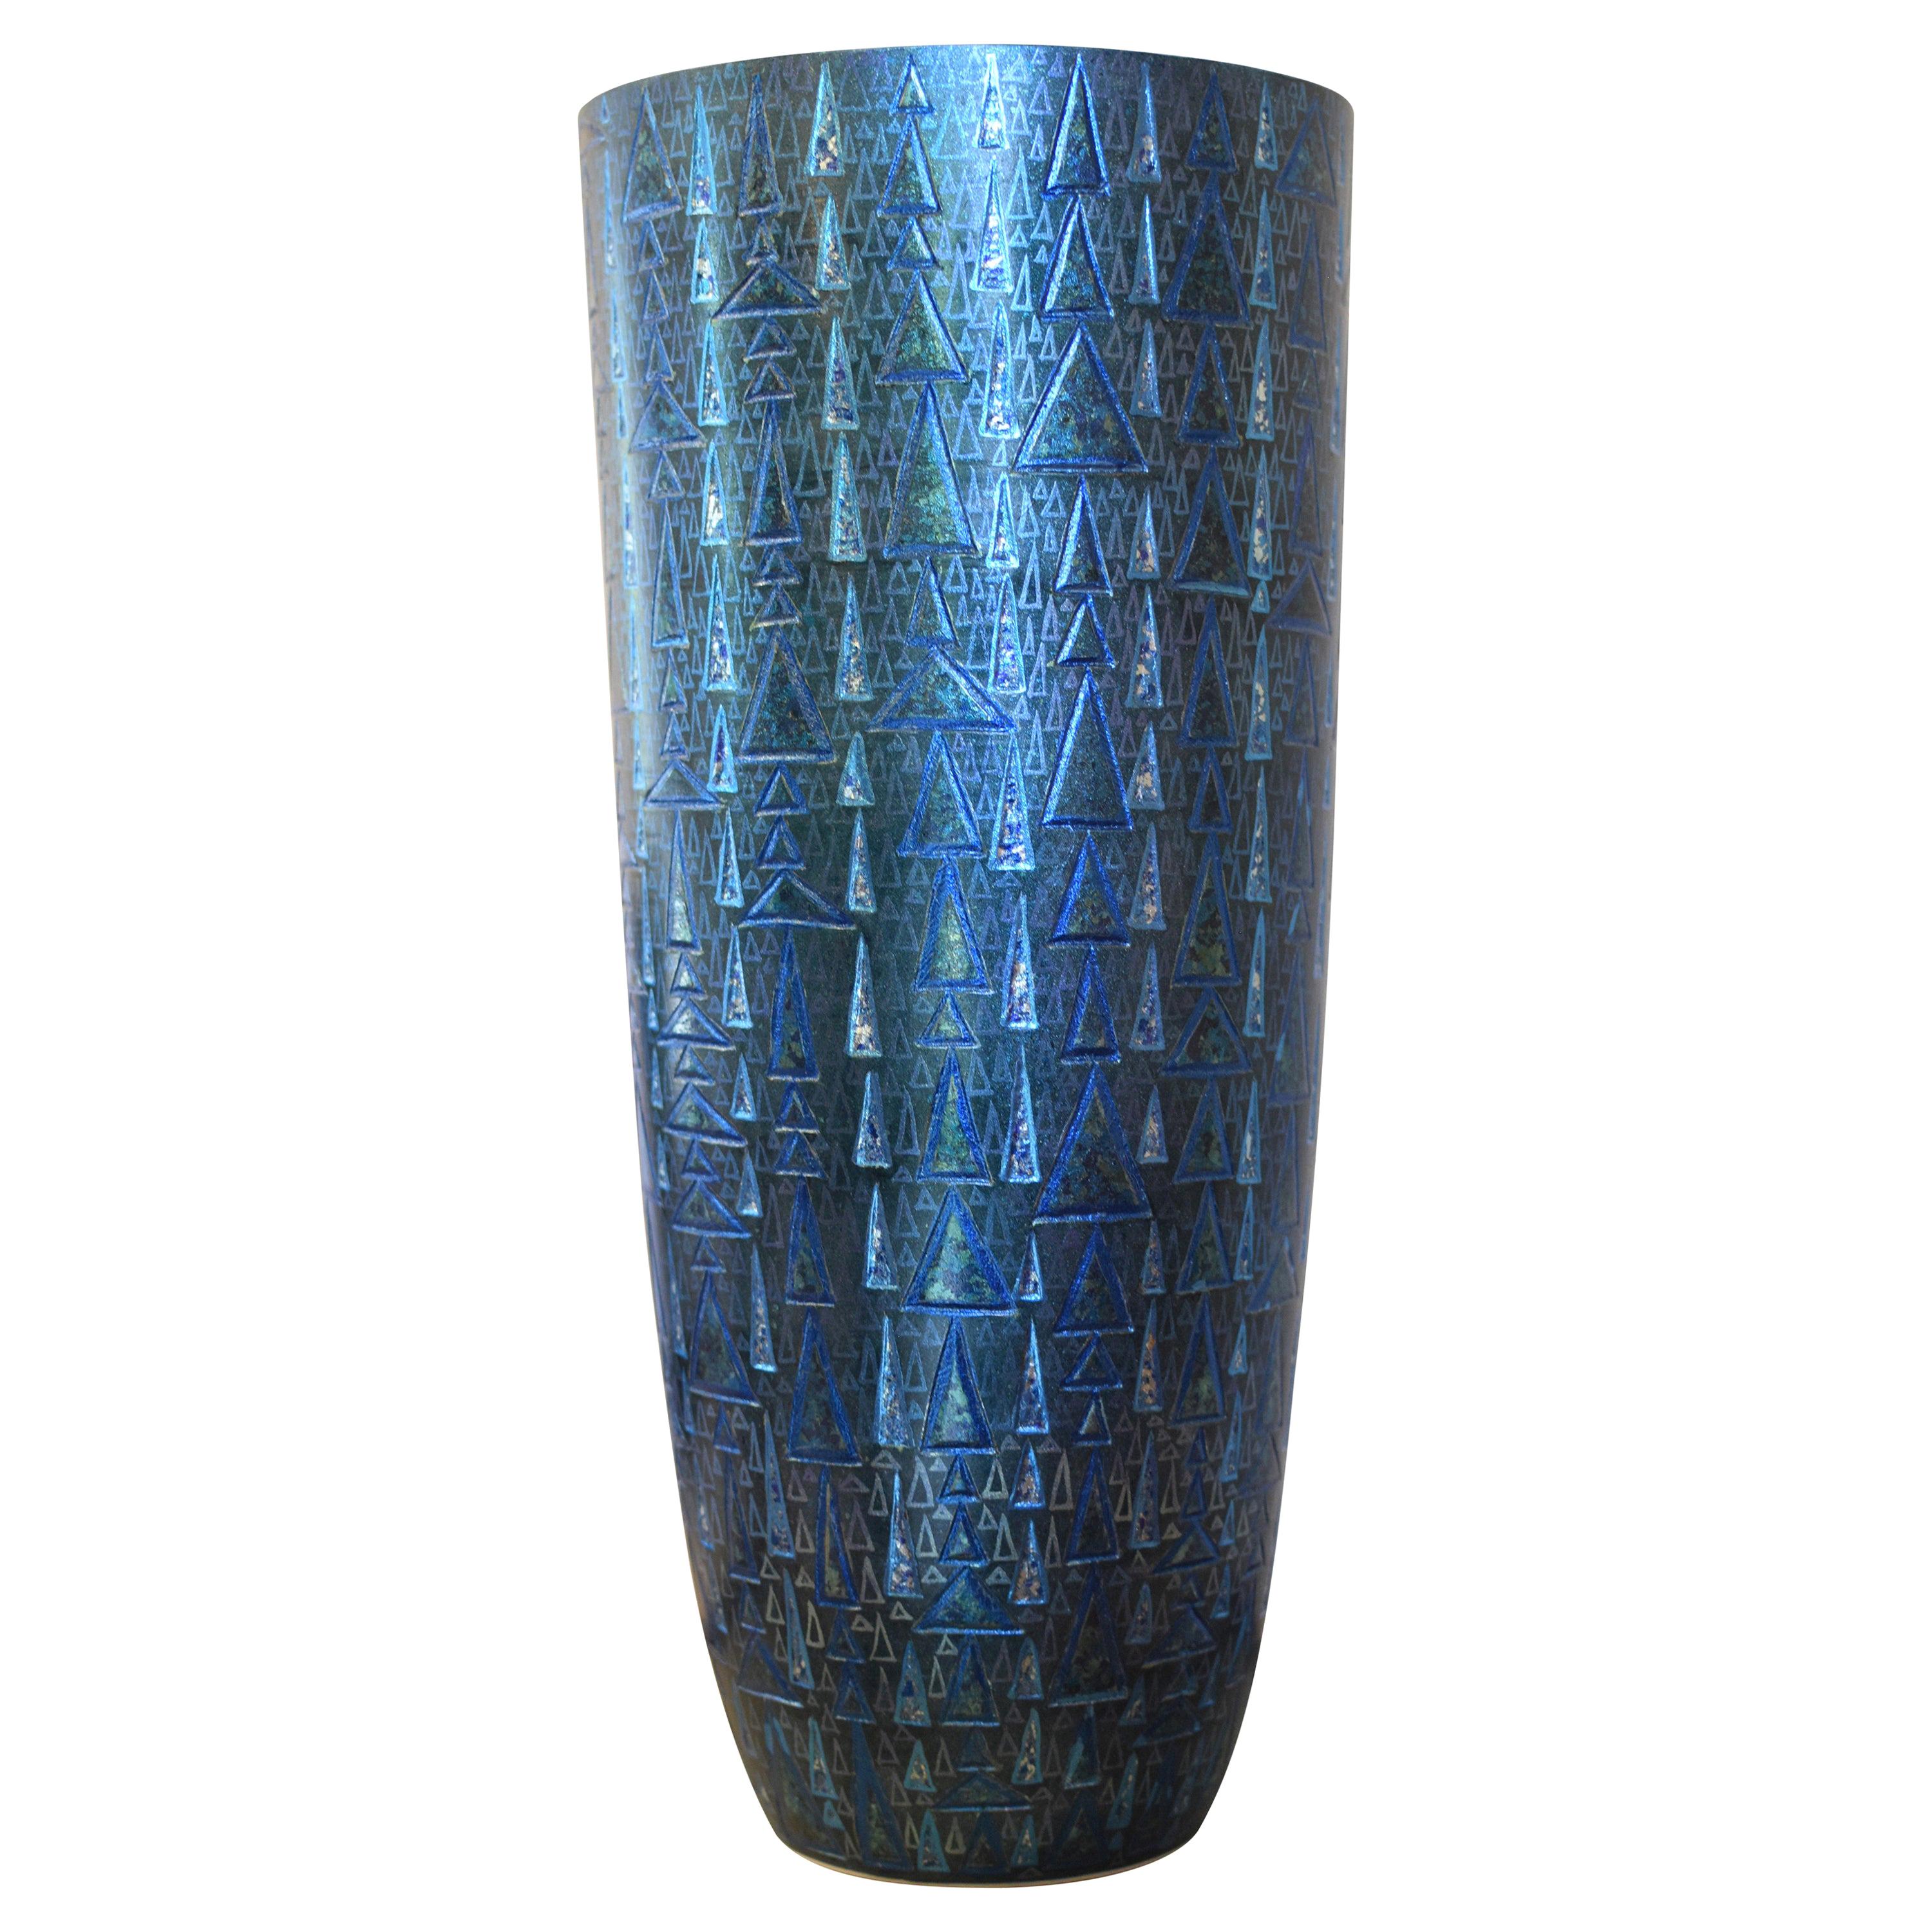 Japanese Contemporary Blue Silver Etched Porcelain Vase by Master Artist